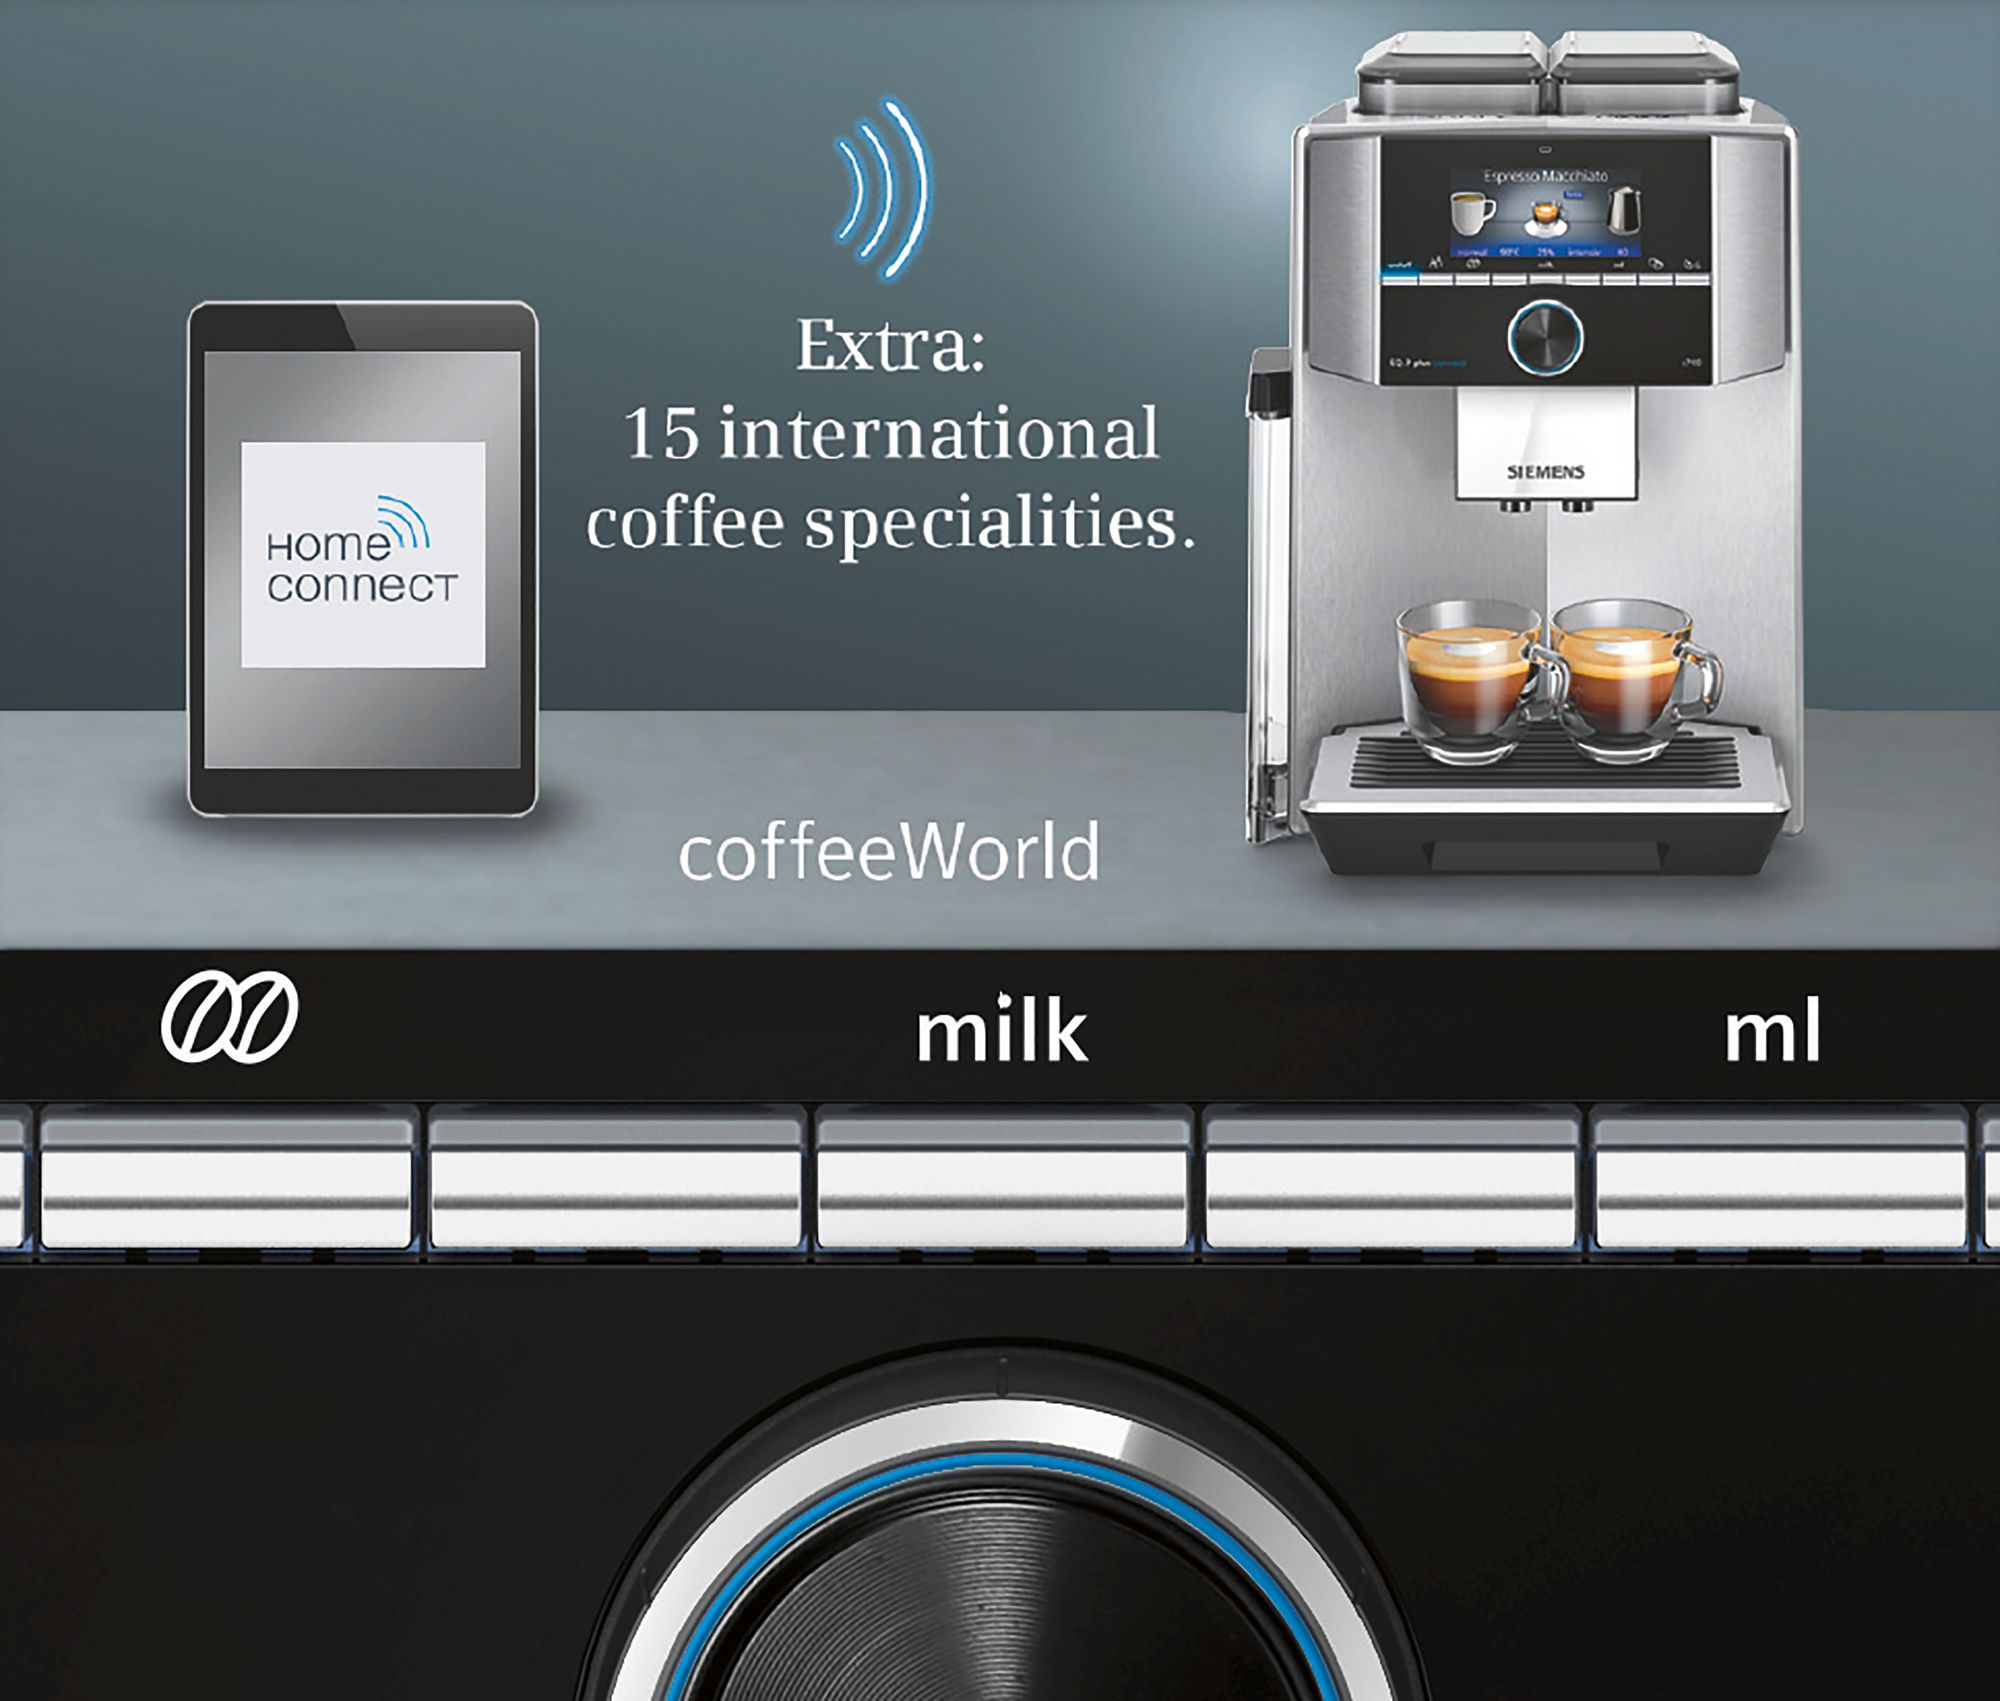 Fully automatic coffee machine EQ.9 plus connect s700 siyah